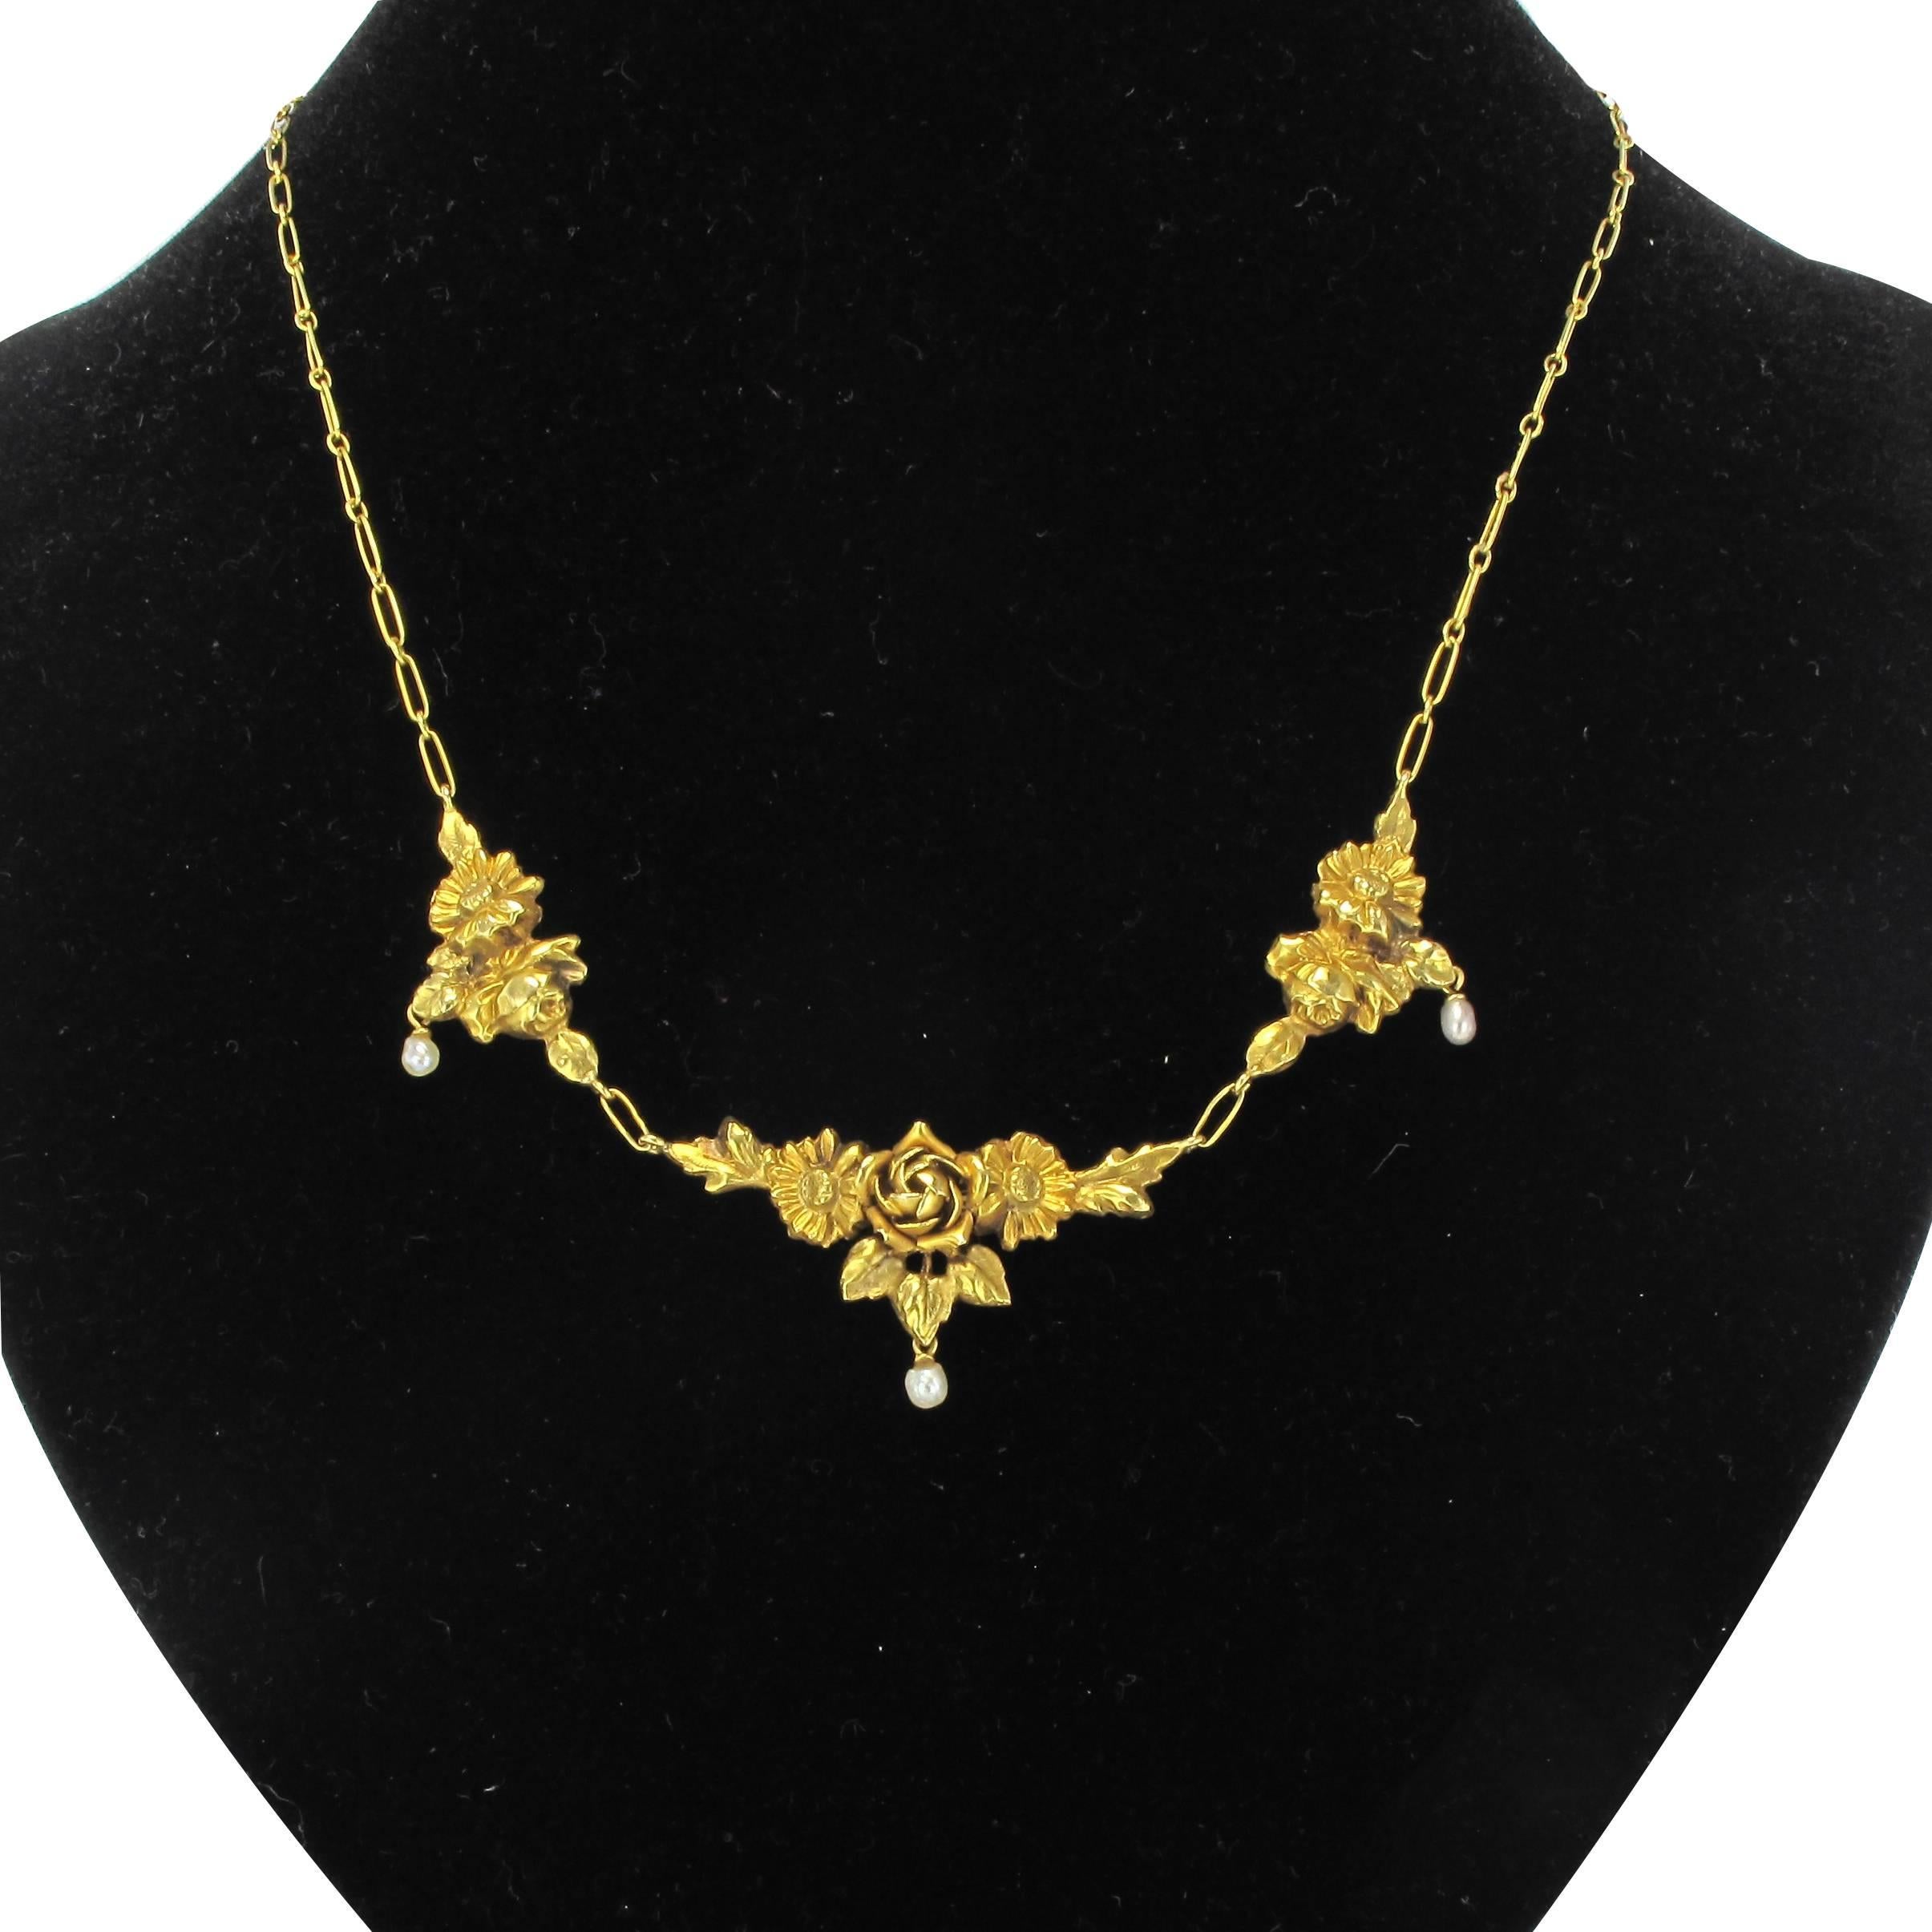 Necklace in yellow gold, 18 carats, 750 thousandths, eagle's head hallmark.
This stunning antique yellow gold necklace is composed of 3 motifs representing roses and leaves each holding a suspended natural baroque pearl. The motifs are held and